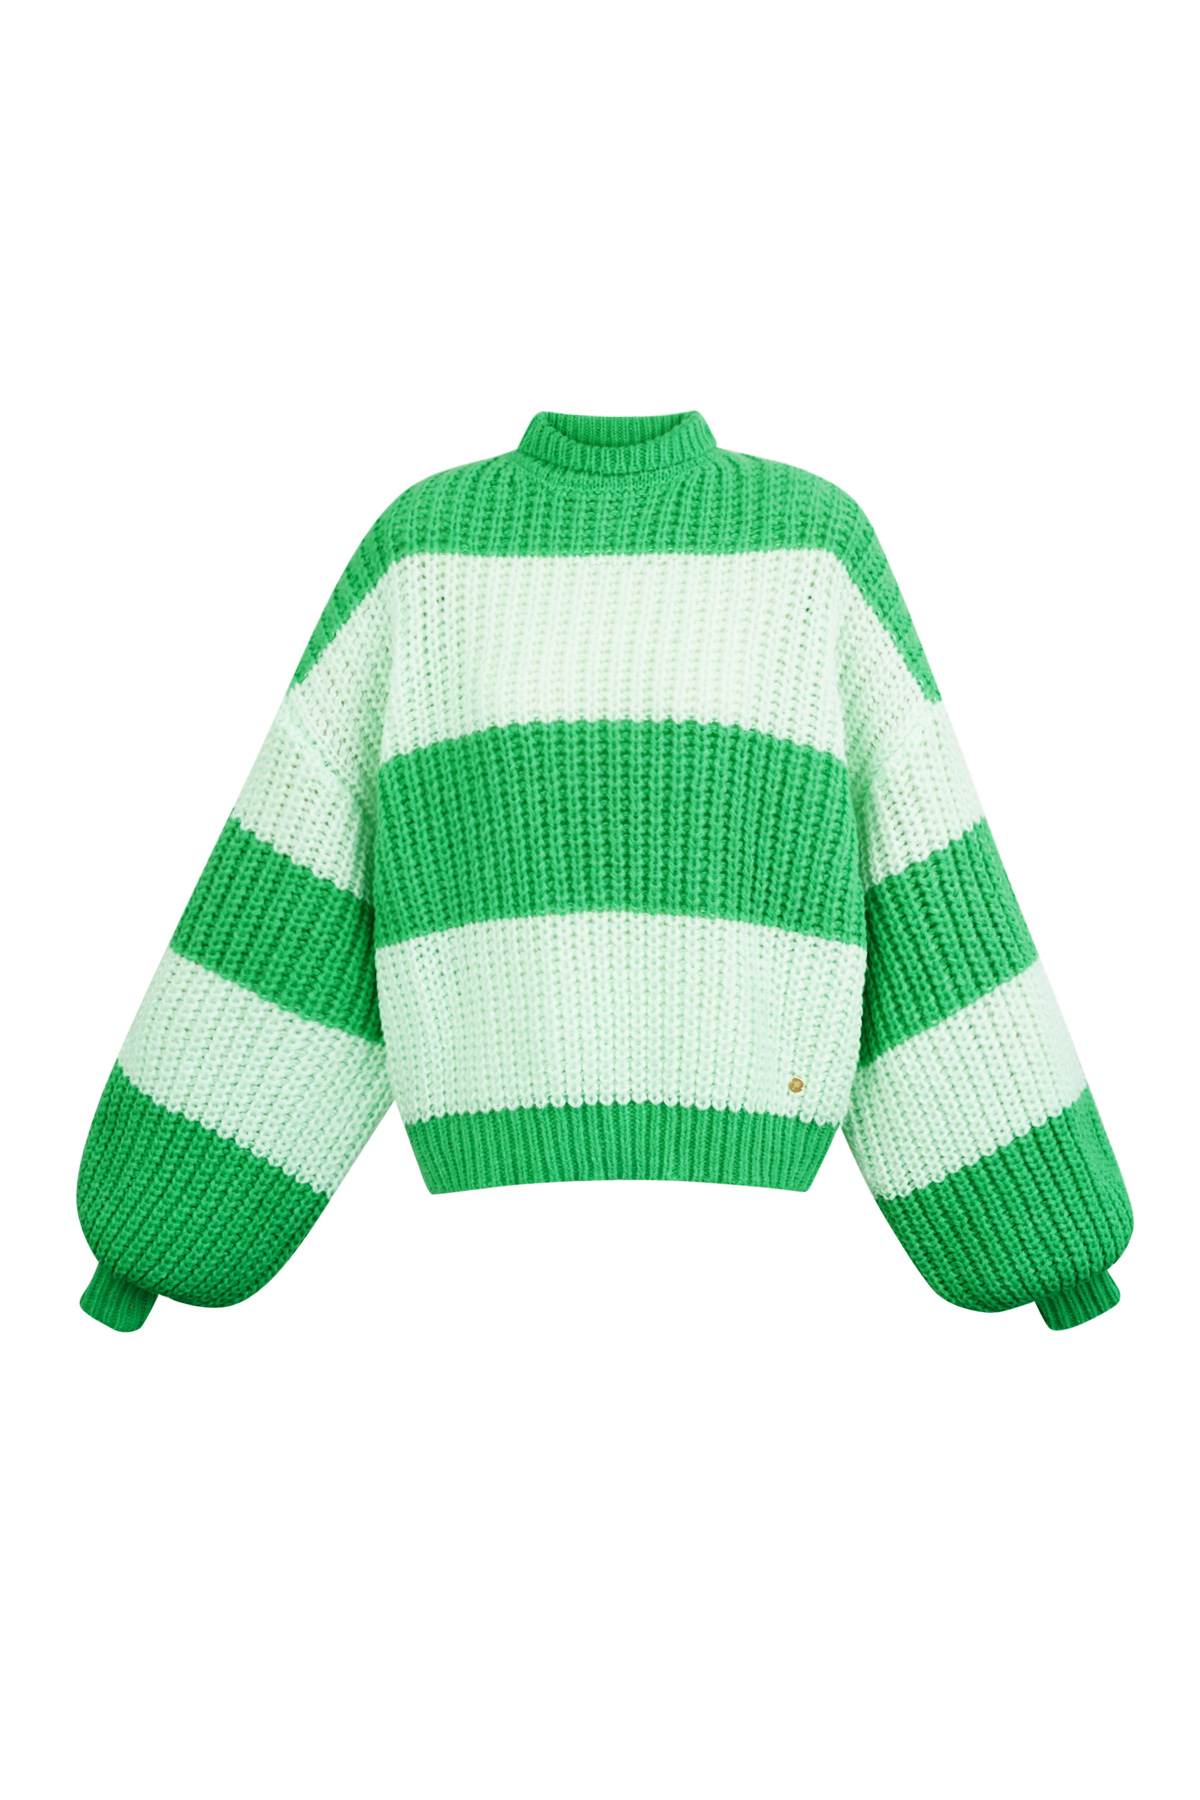 Warm knitted striped sweater - green